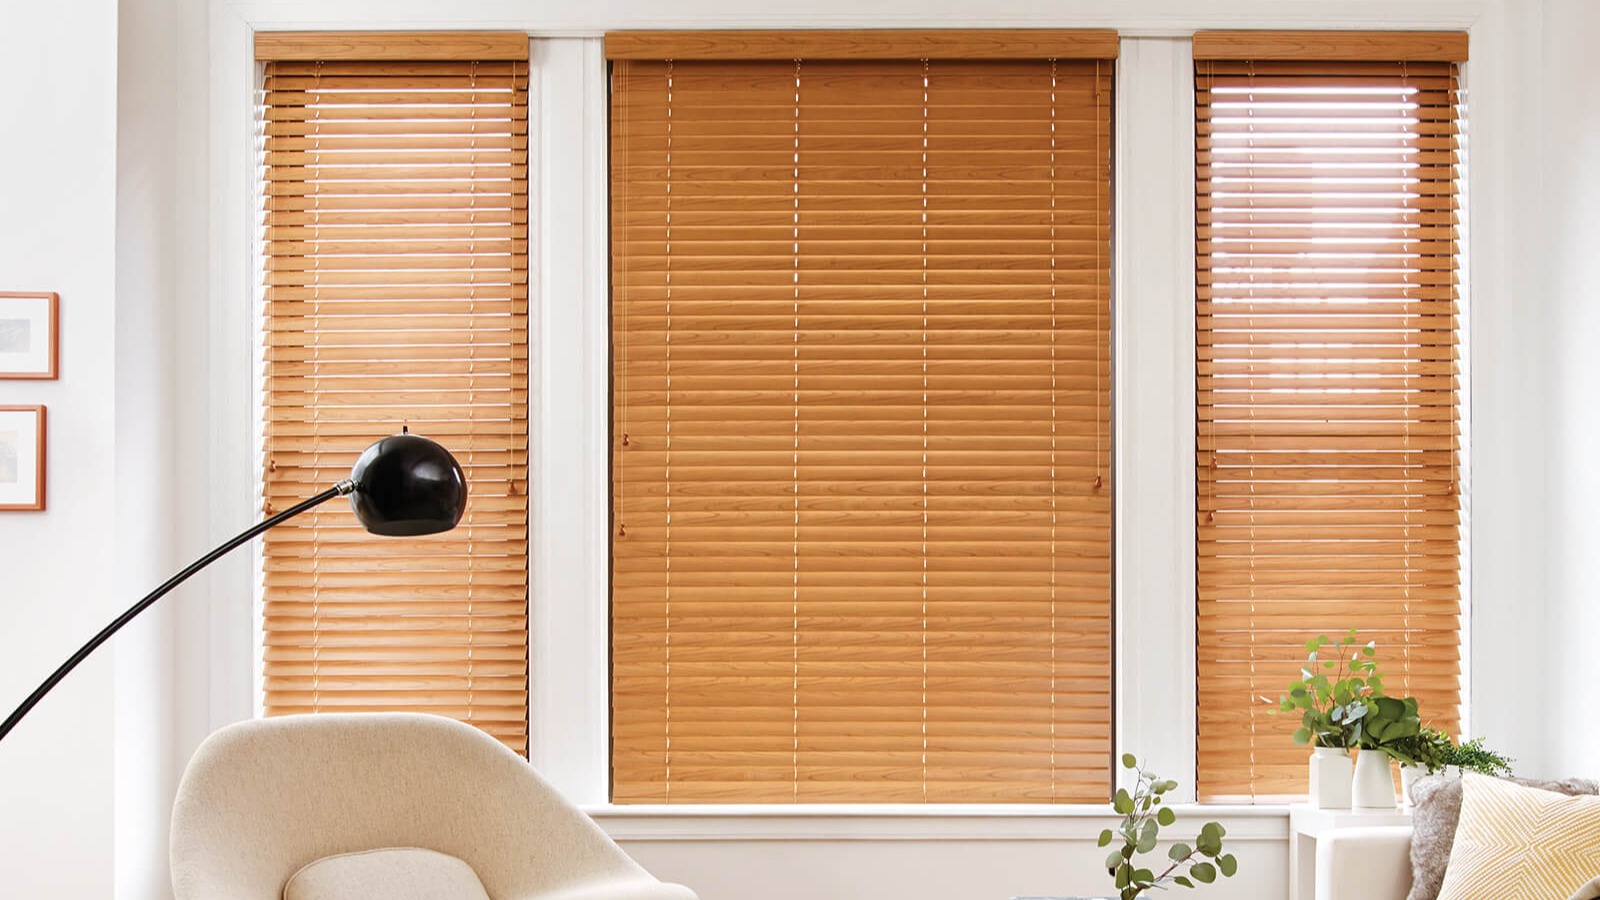 How to Clean Blinds - The Home Depot